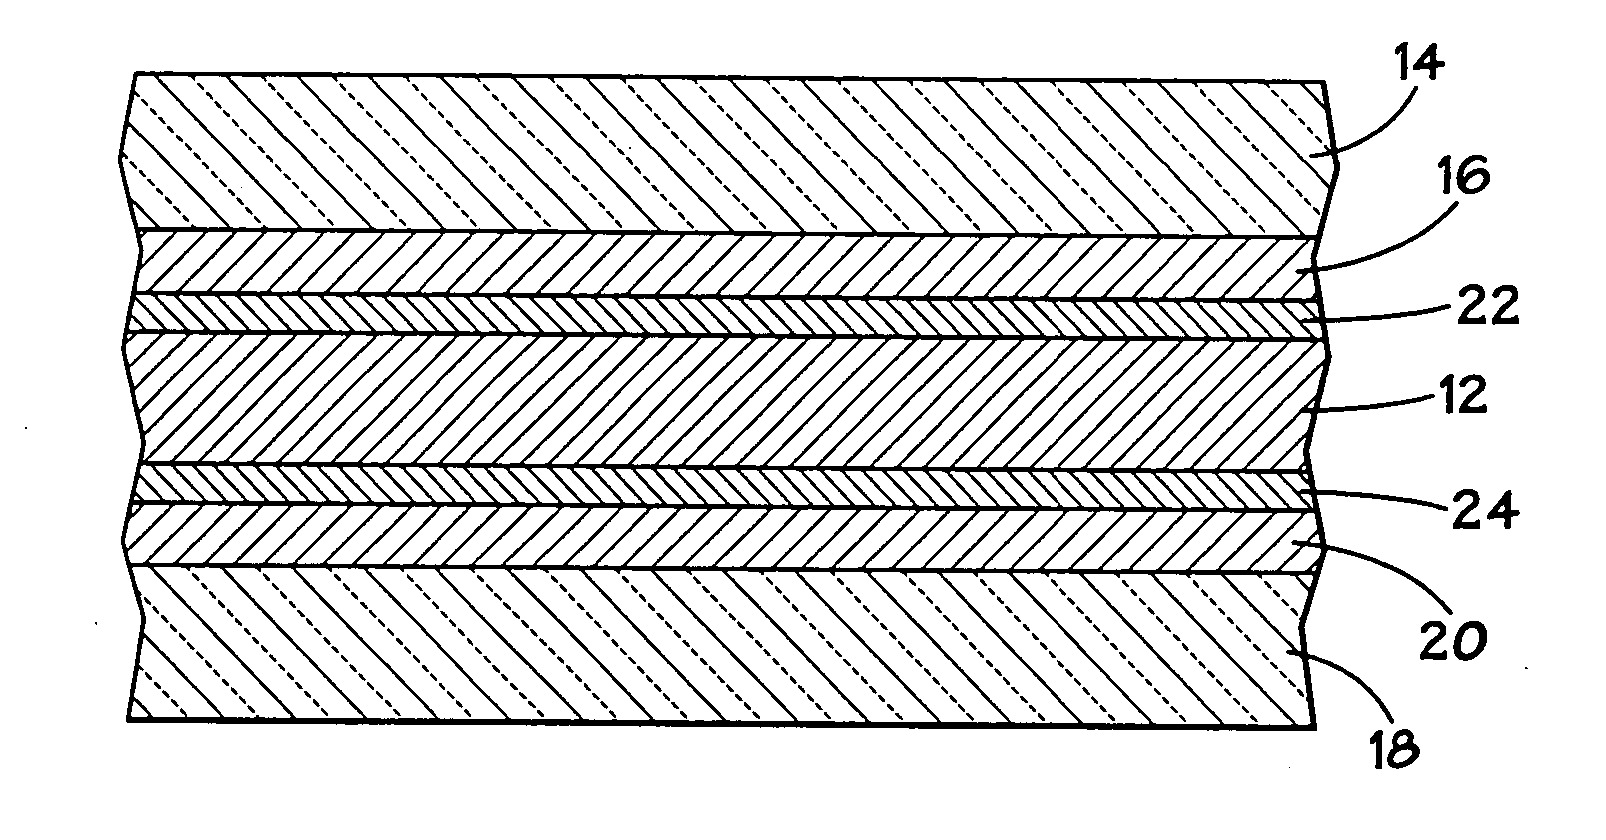 Dye sensitized solar cells having blocking layers and methods of manufacturing the same